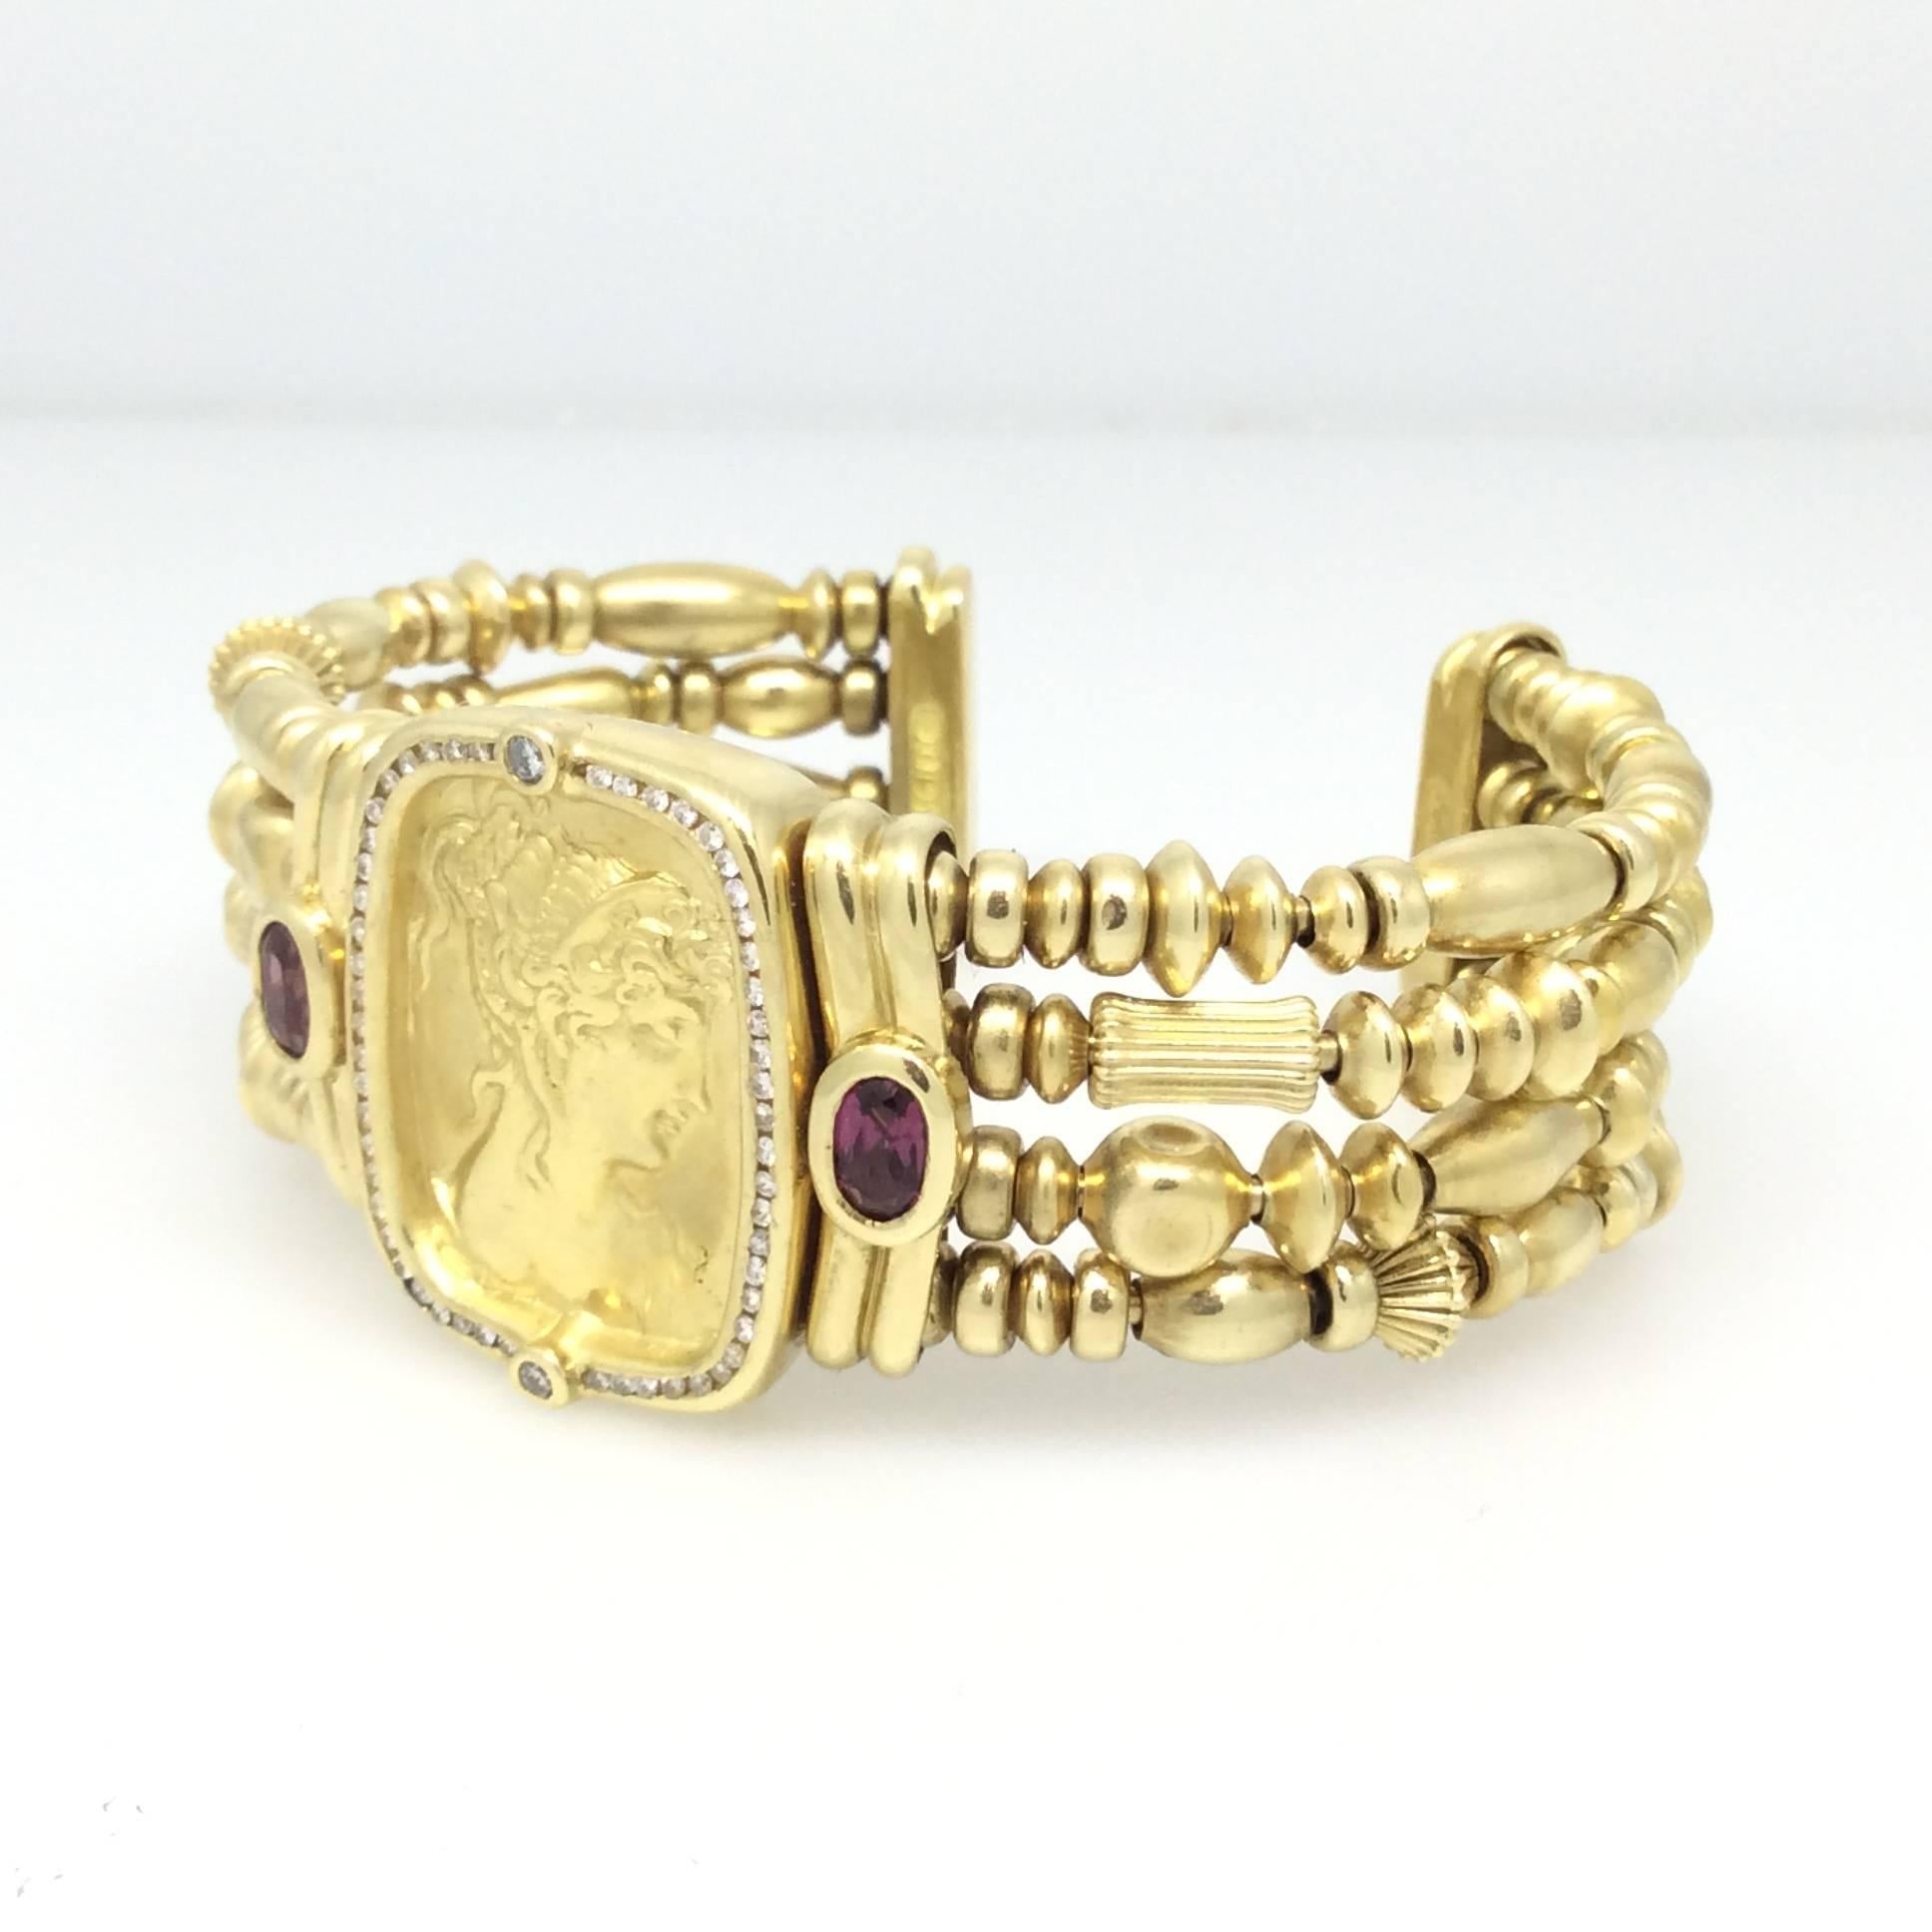 SeidenGang 4 Row Pink Tourmaline Diamond Gold Cuff Bracelet In Excellent Condition For Sale In La Jolla, CA